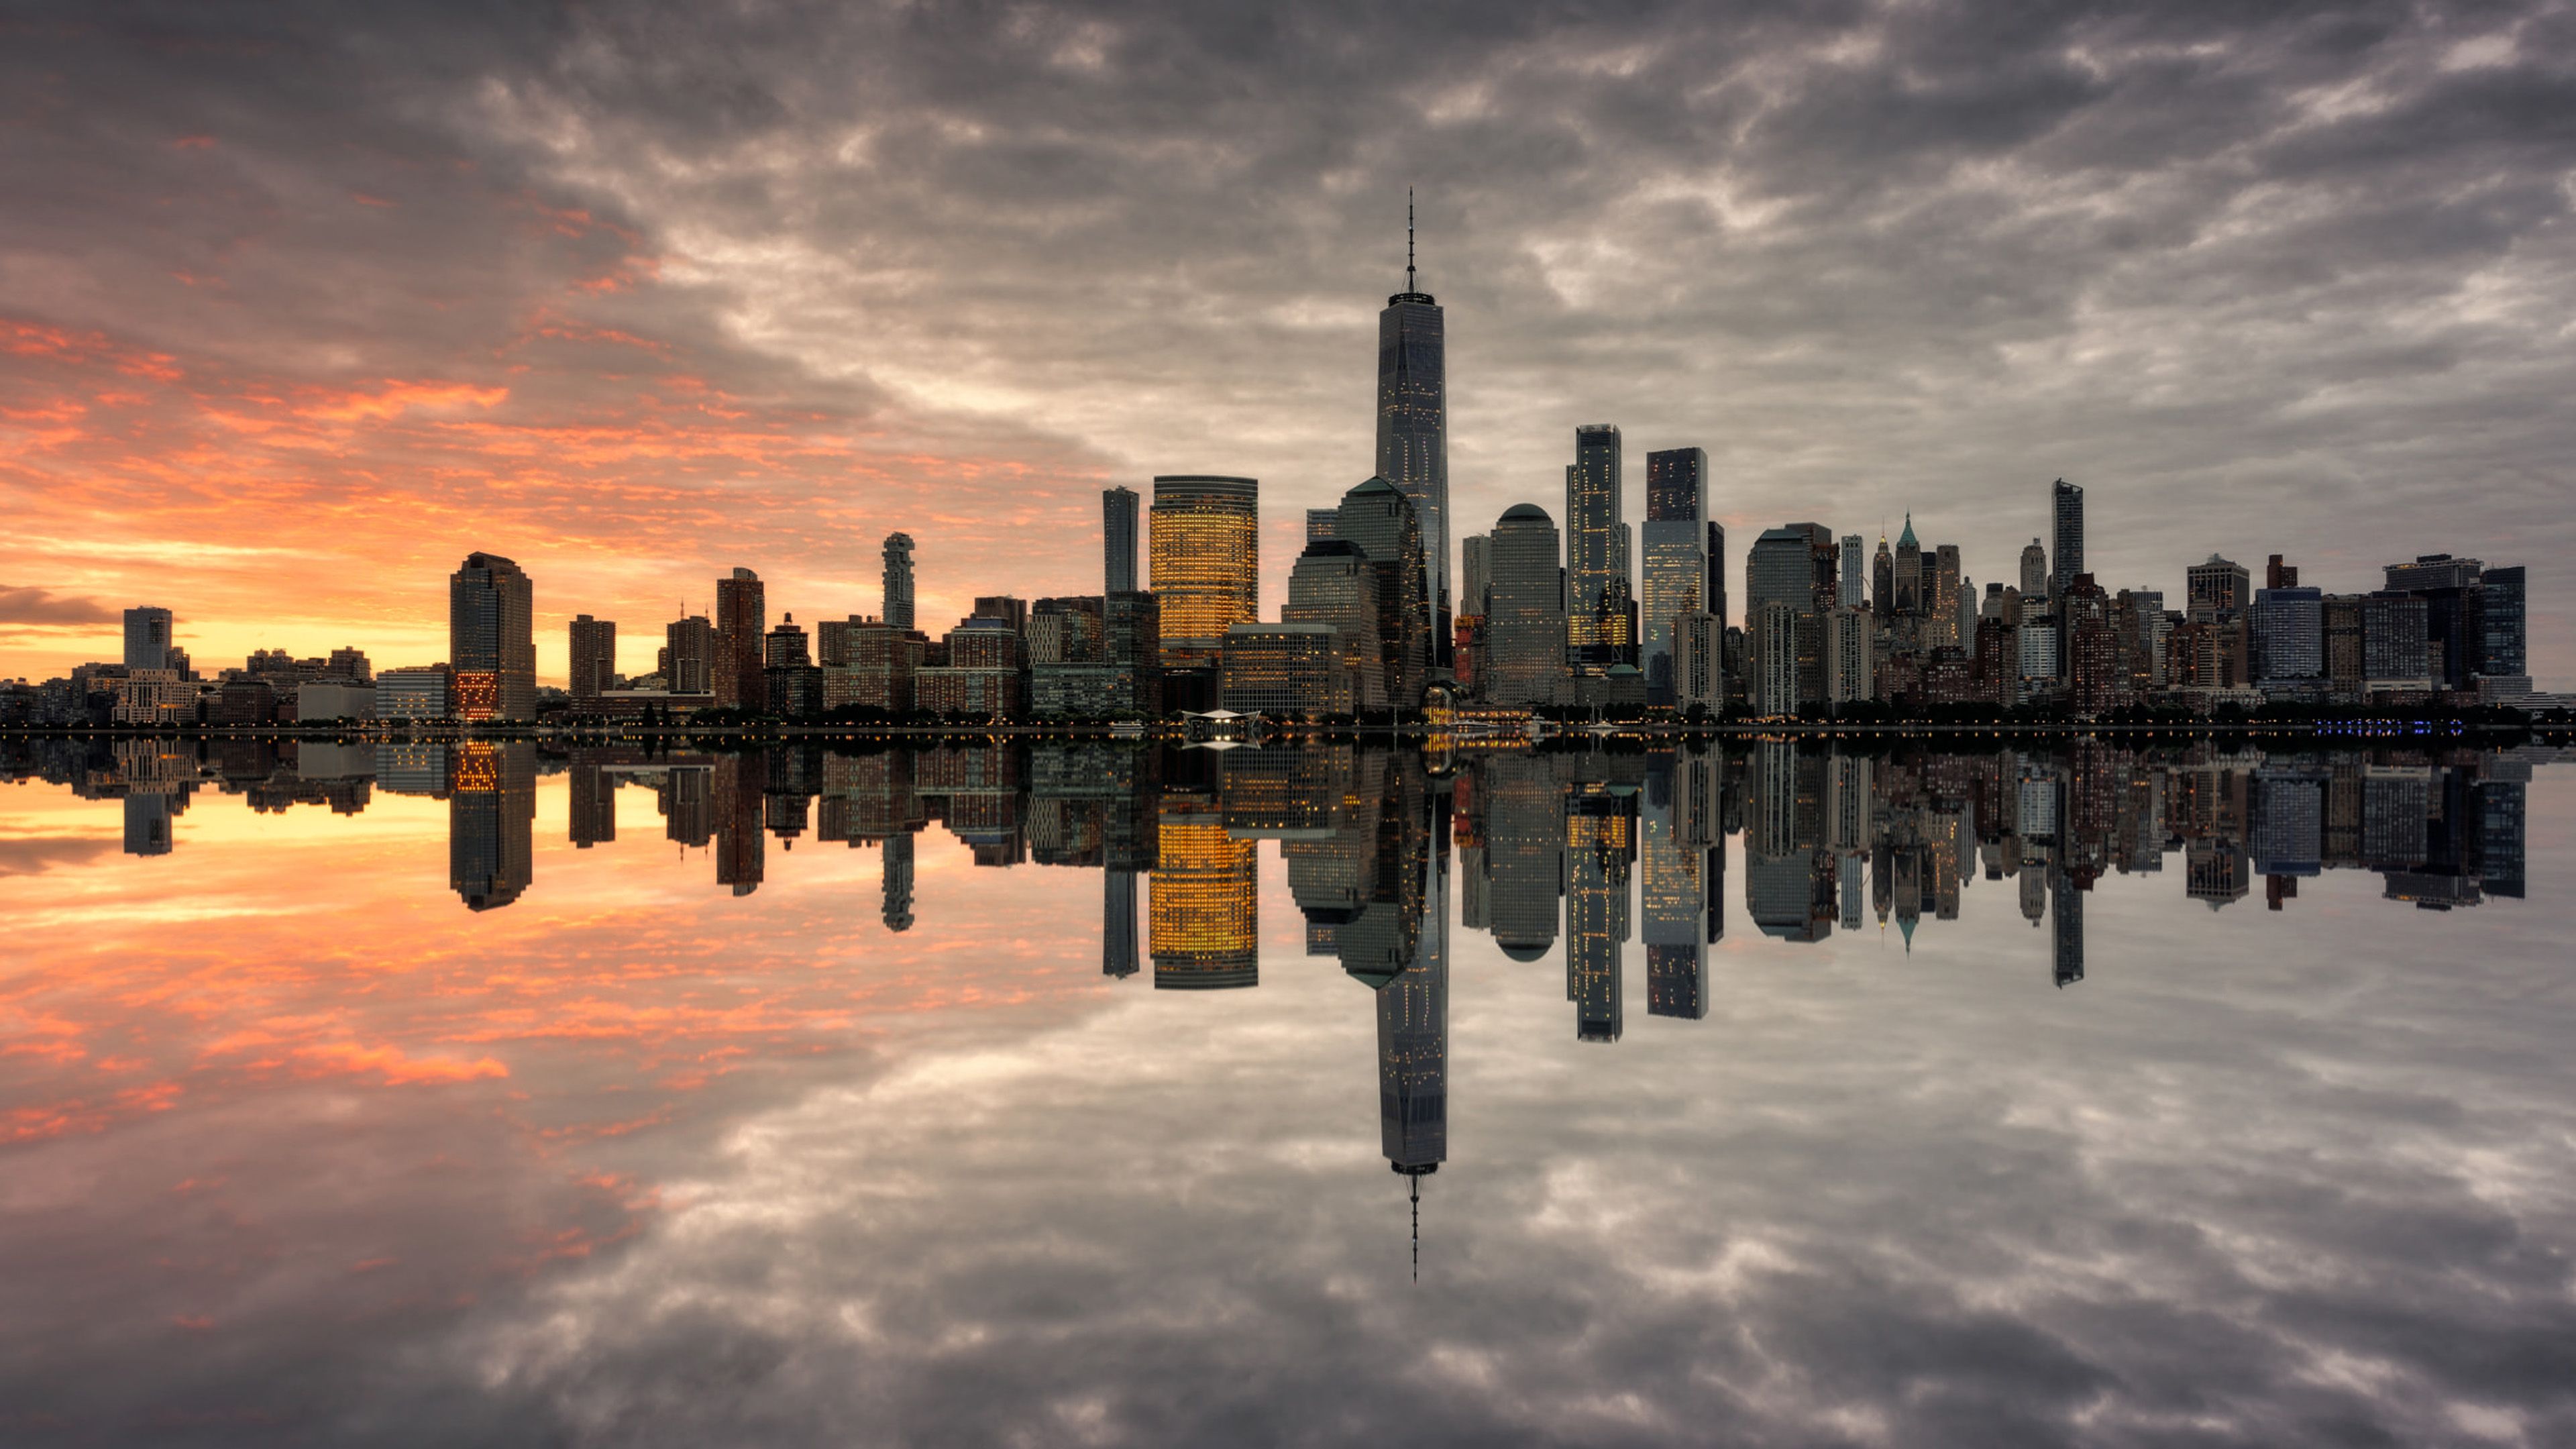 Manhattan Skyline The Most Populated New York City Sunnset Reflection In The Water Miror Ultra HD Wallpaper For Desktop Mobile Phones And Laptops 3840x2160, Wallpaper13.com